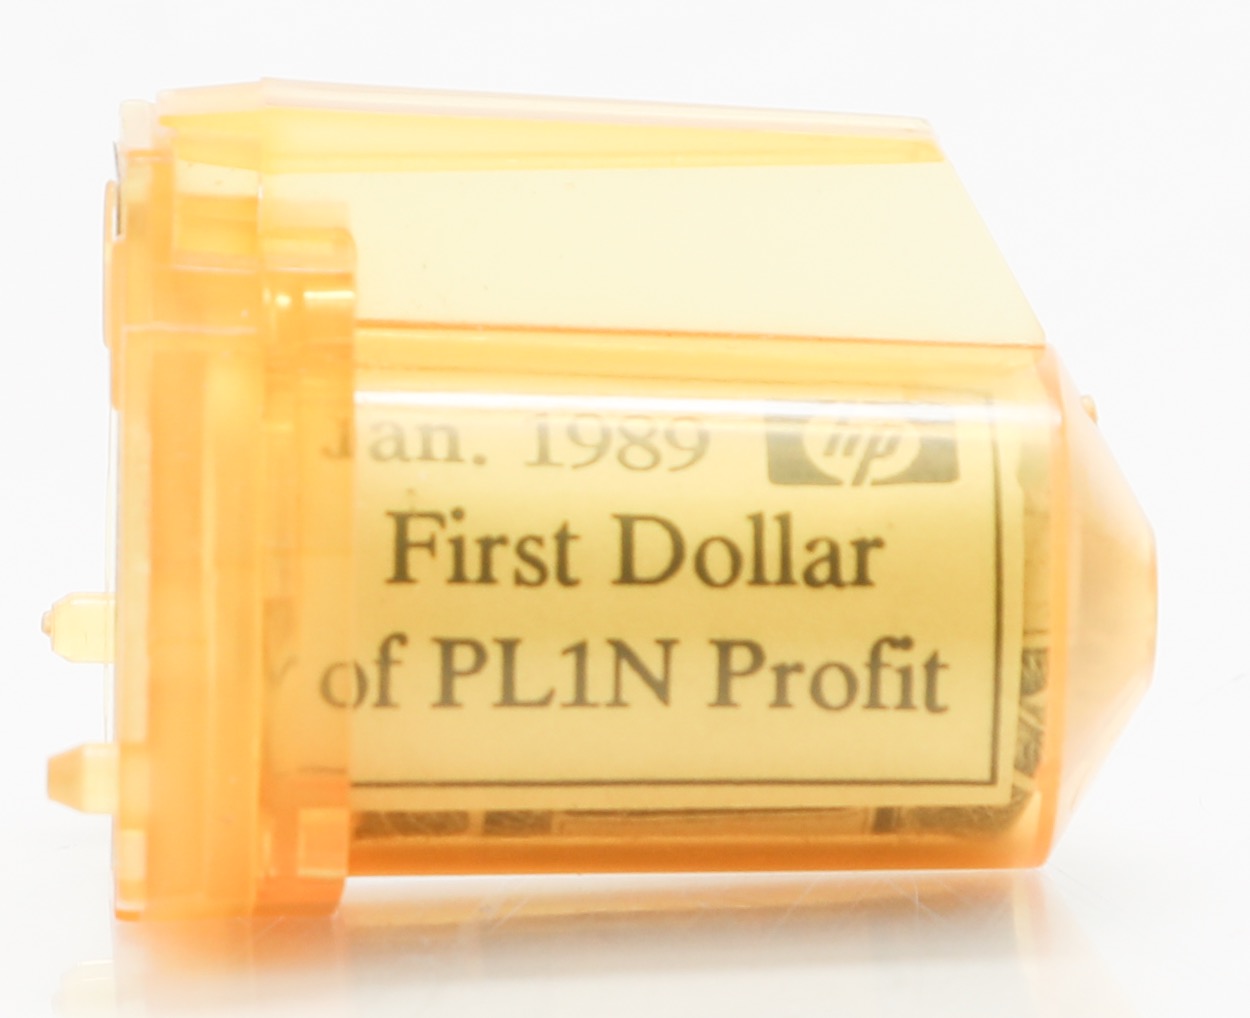 An unused inkjet cartridge holding the first dollar Hewlett-Packard's PL1N line brought in.